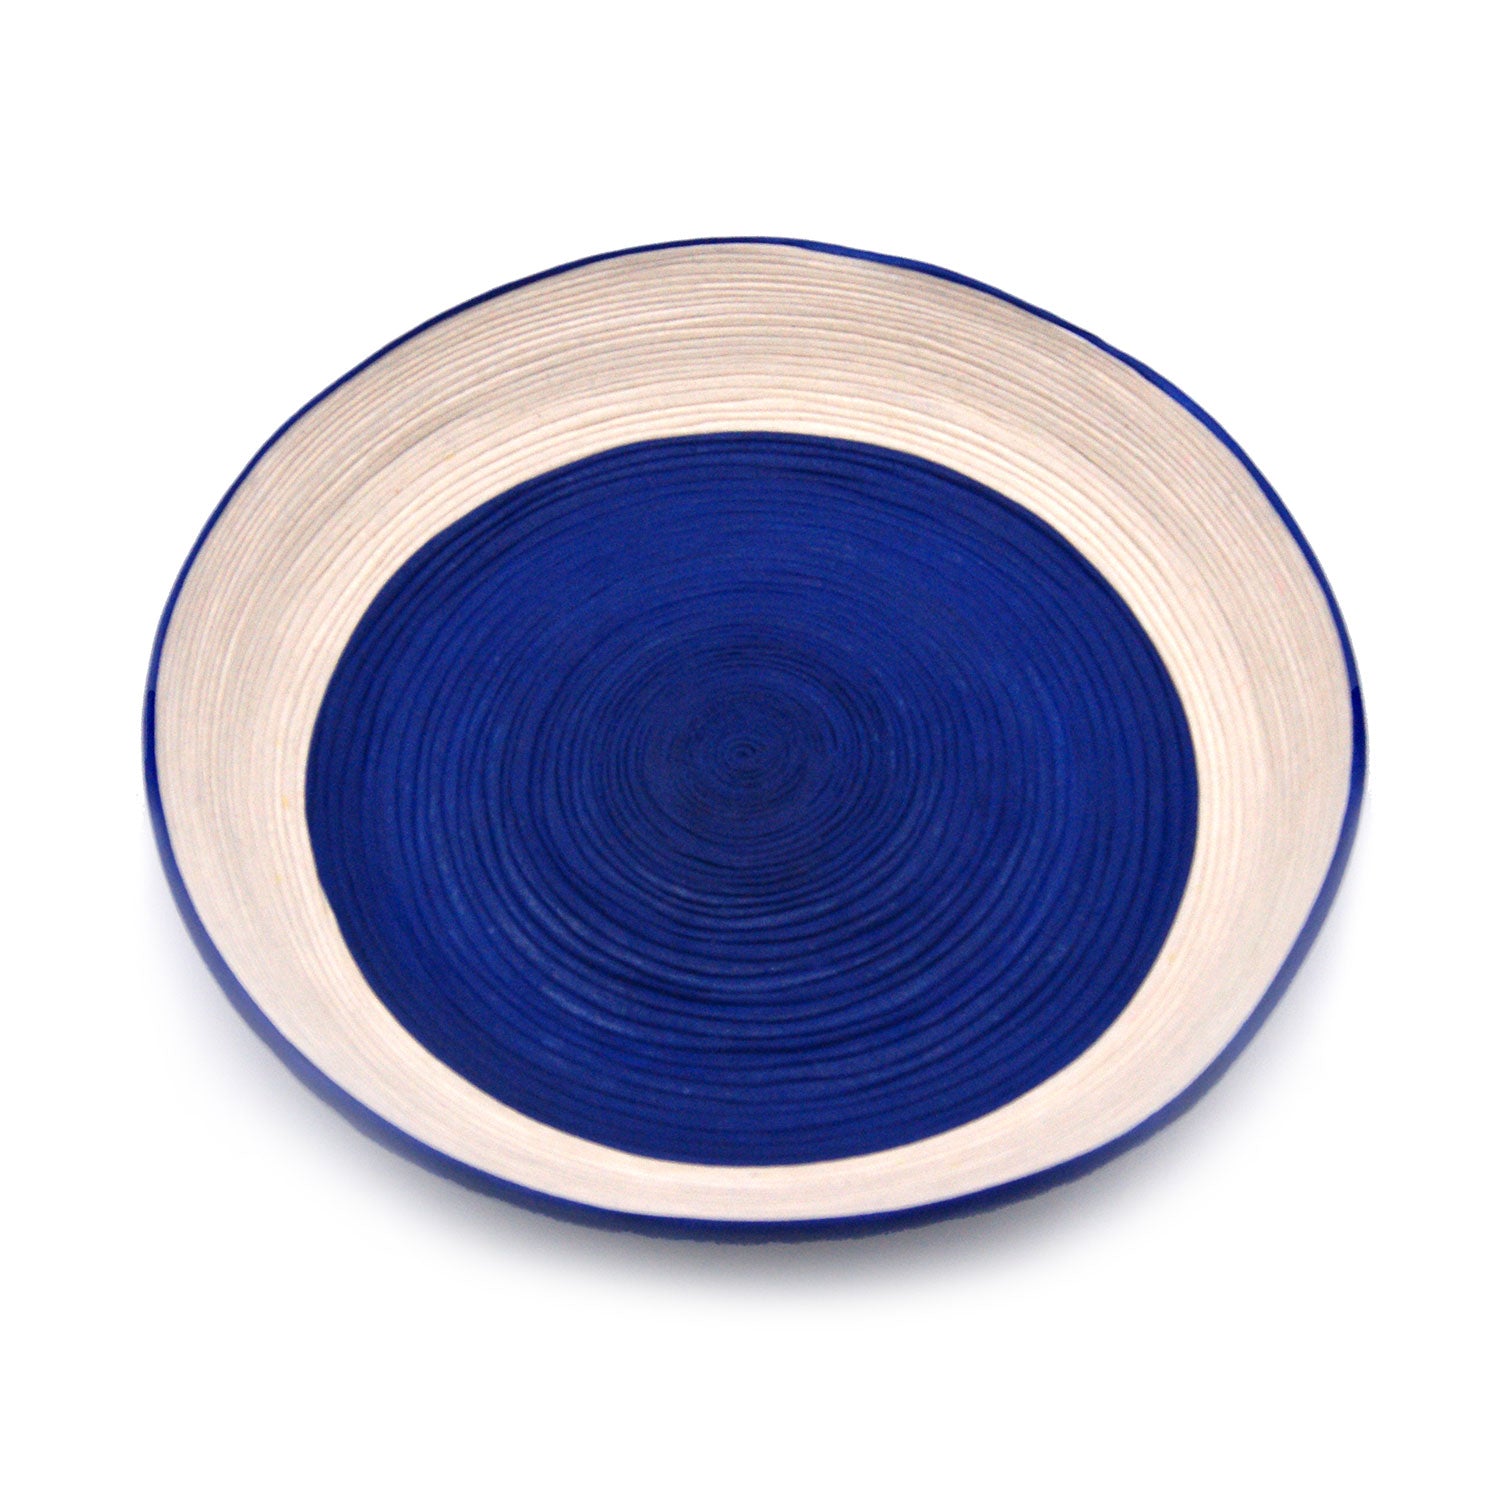 The blue large centerpiece is the perfect vegan, eco-friendly and sustainable home decor gift